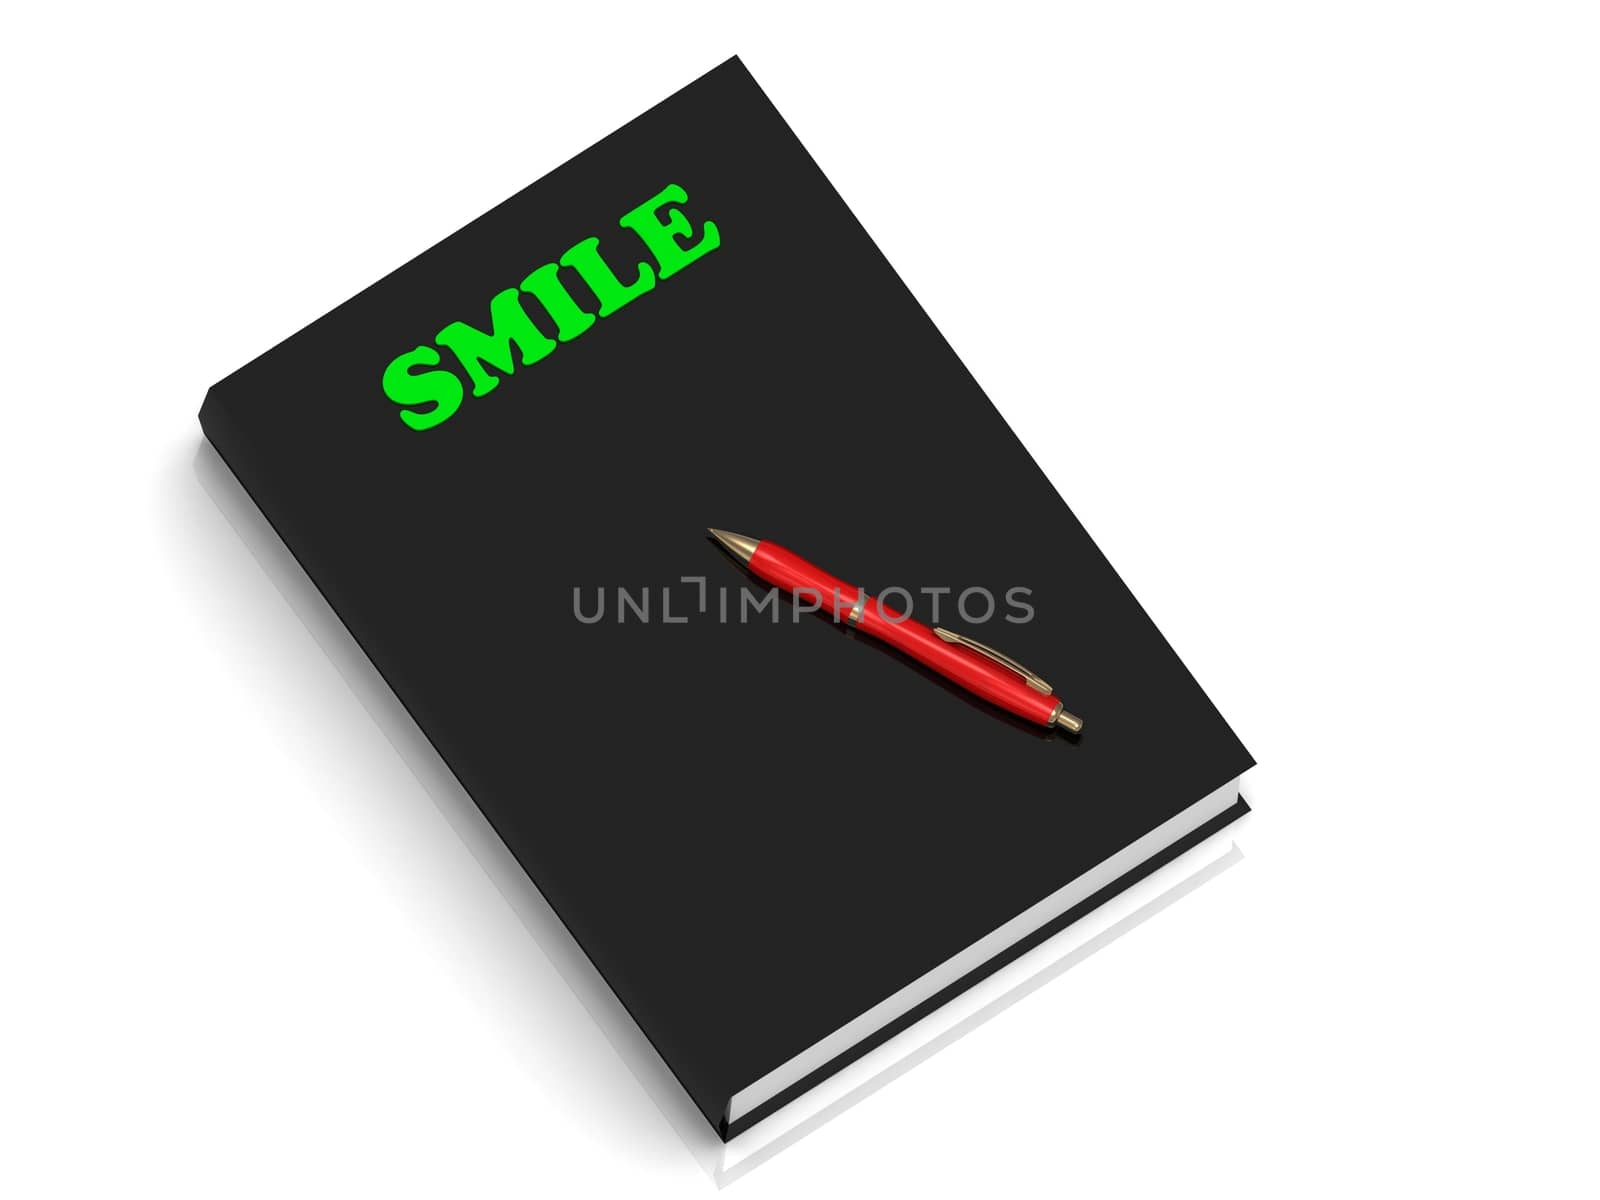 SMILE- inscription of green letters on black book on white background